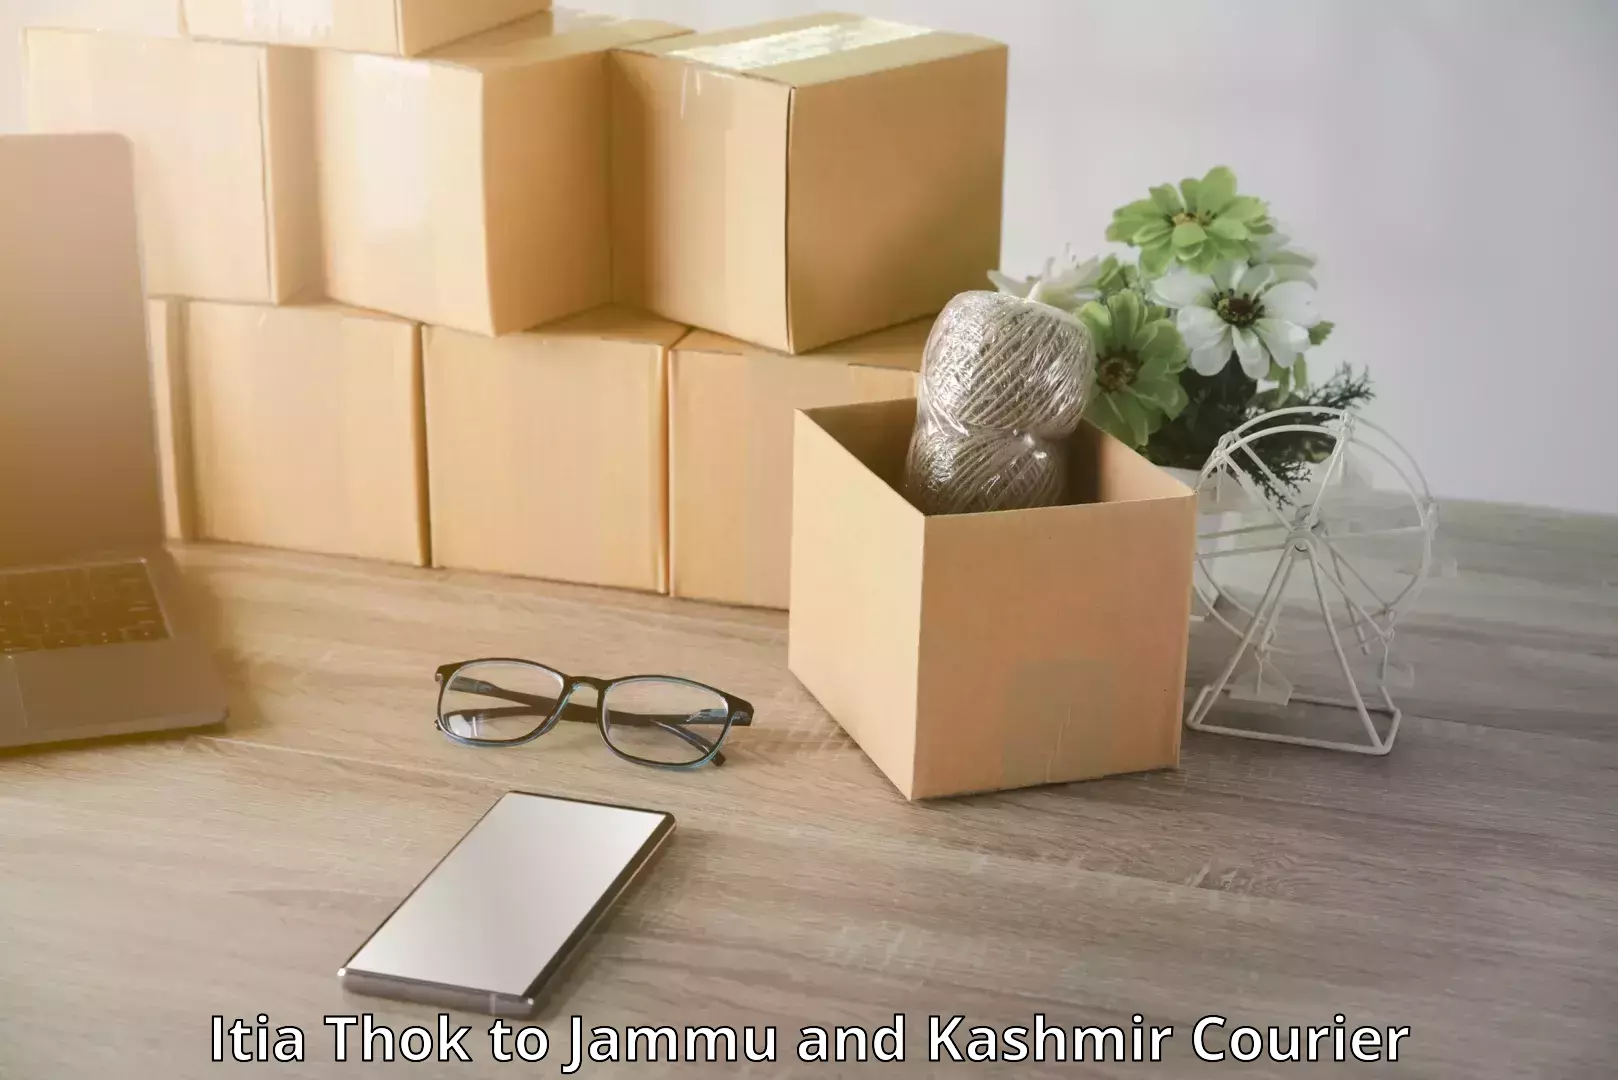 Personal effects shipping in Itia Thok to Jammu and Kashmir